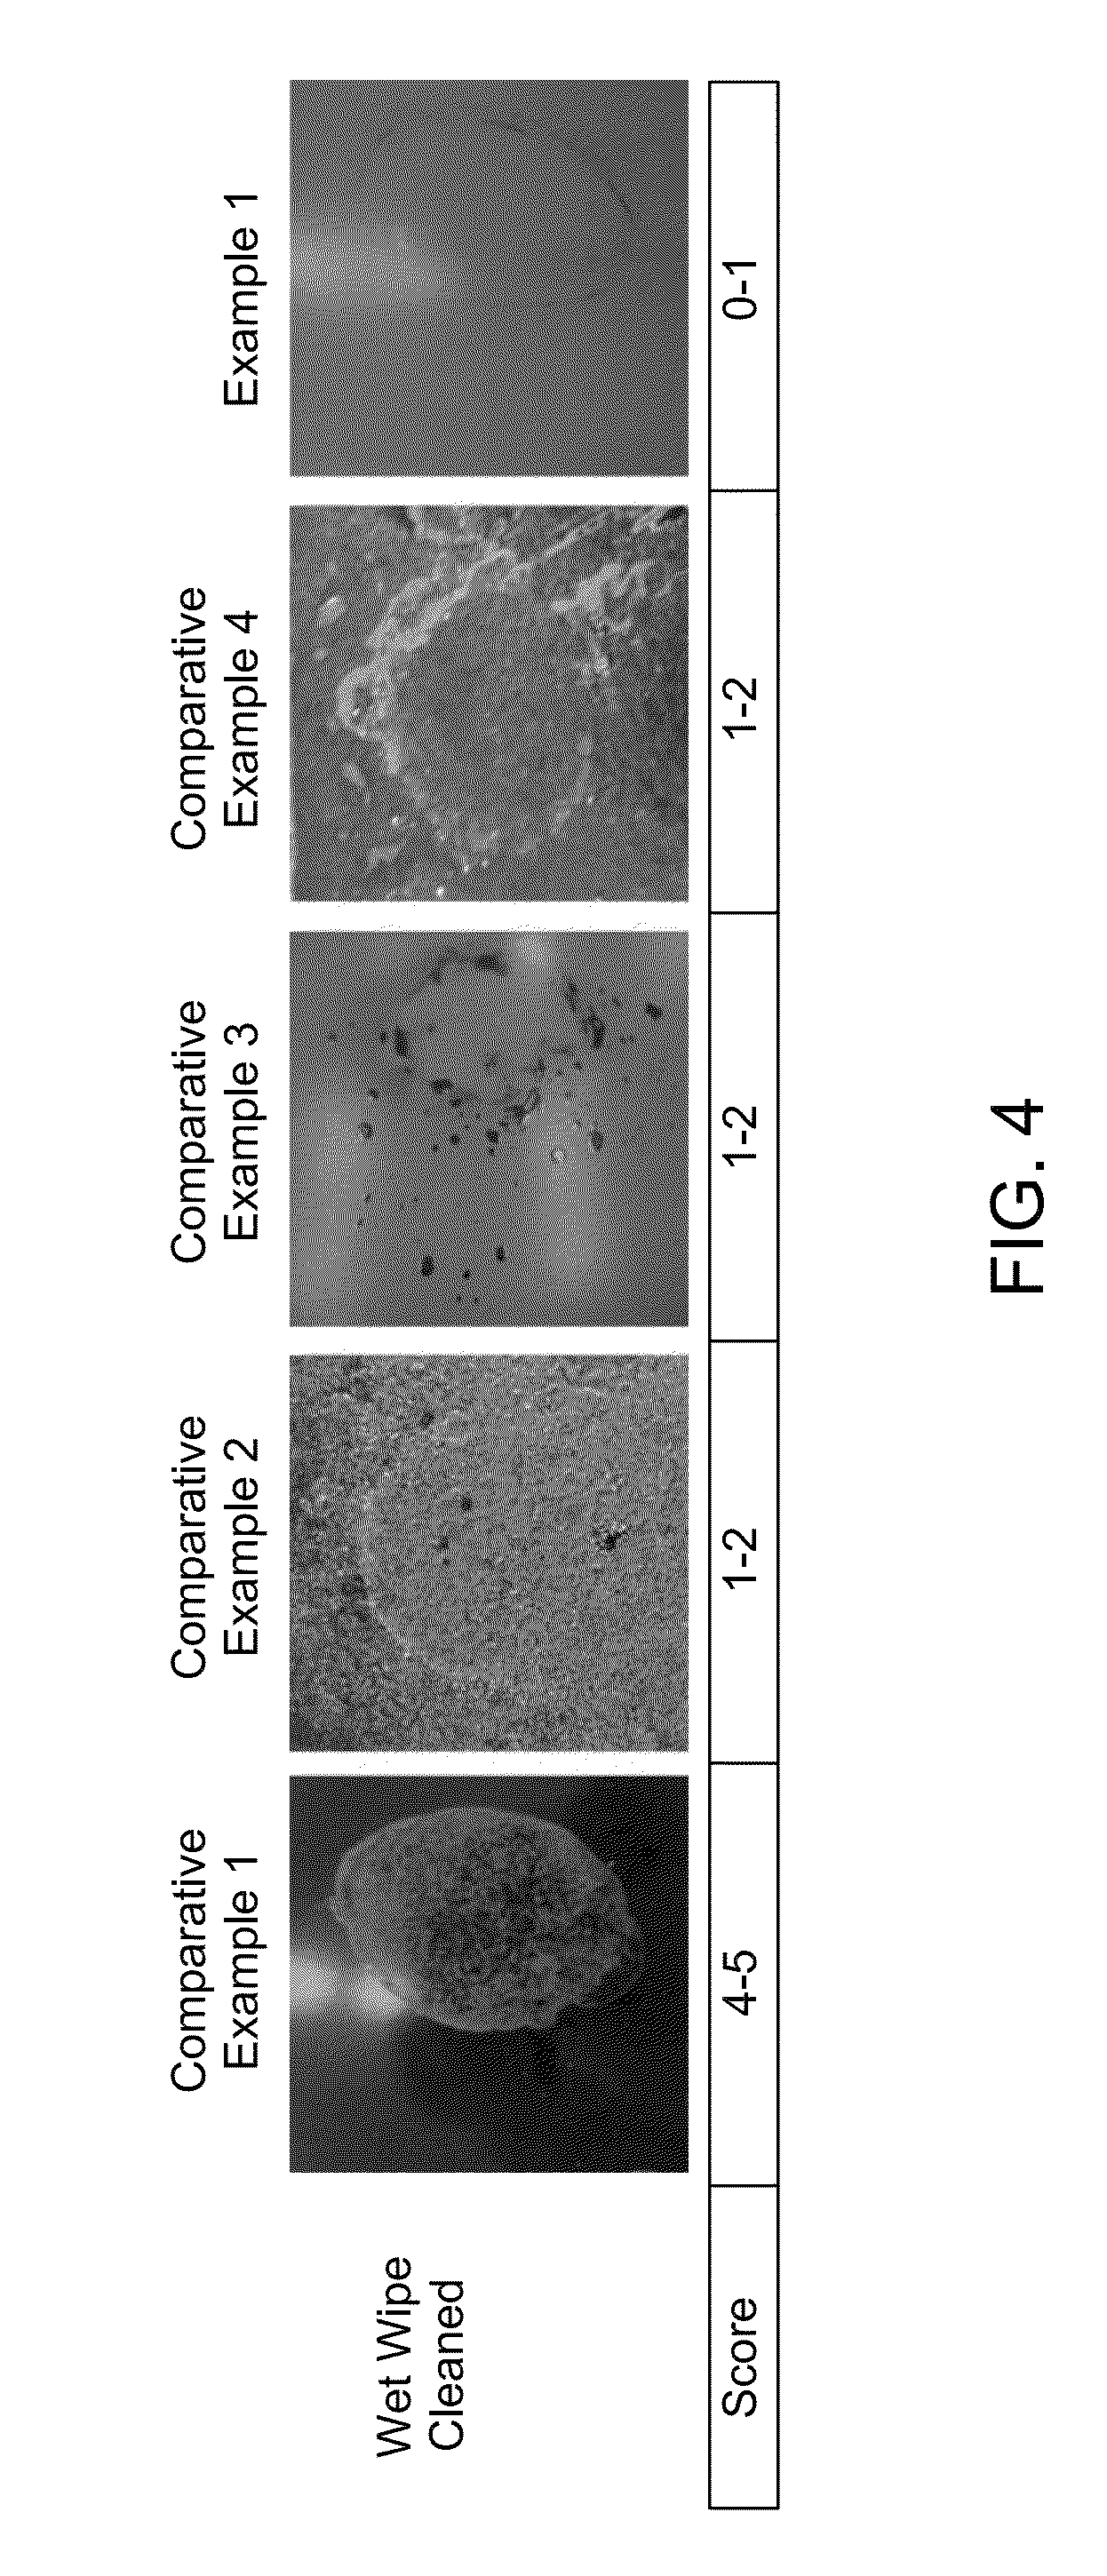 Non-stick, pyrolytic coatings for heating devices